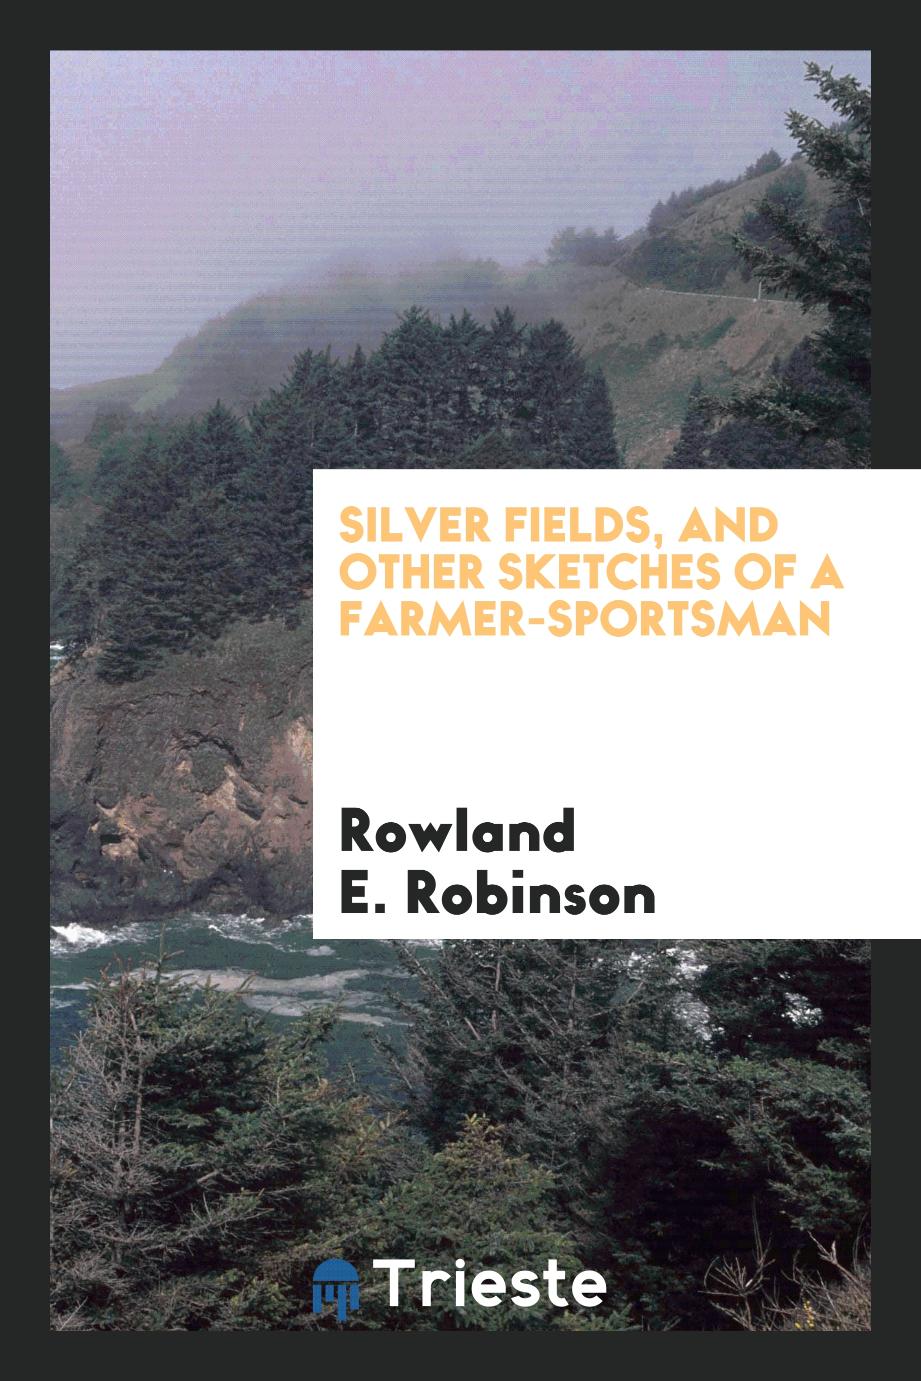 Silver fields, and other sketches of a farmer-sportsman